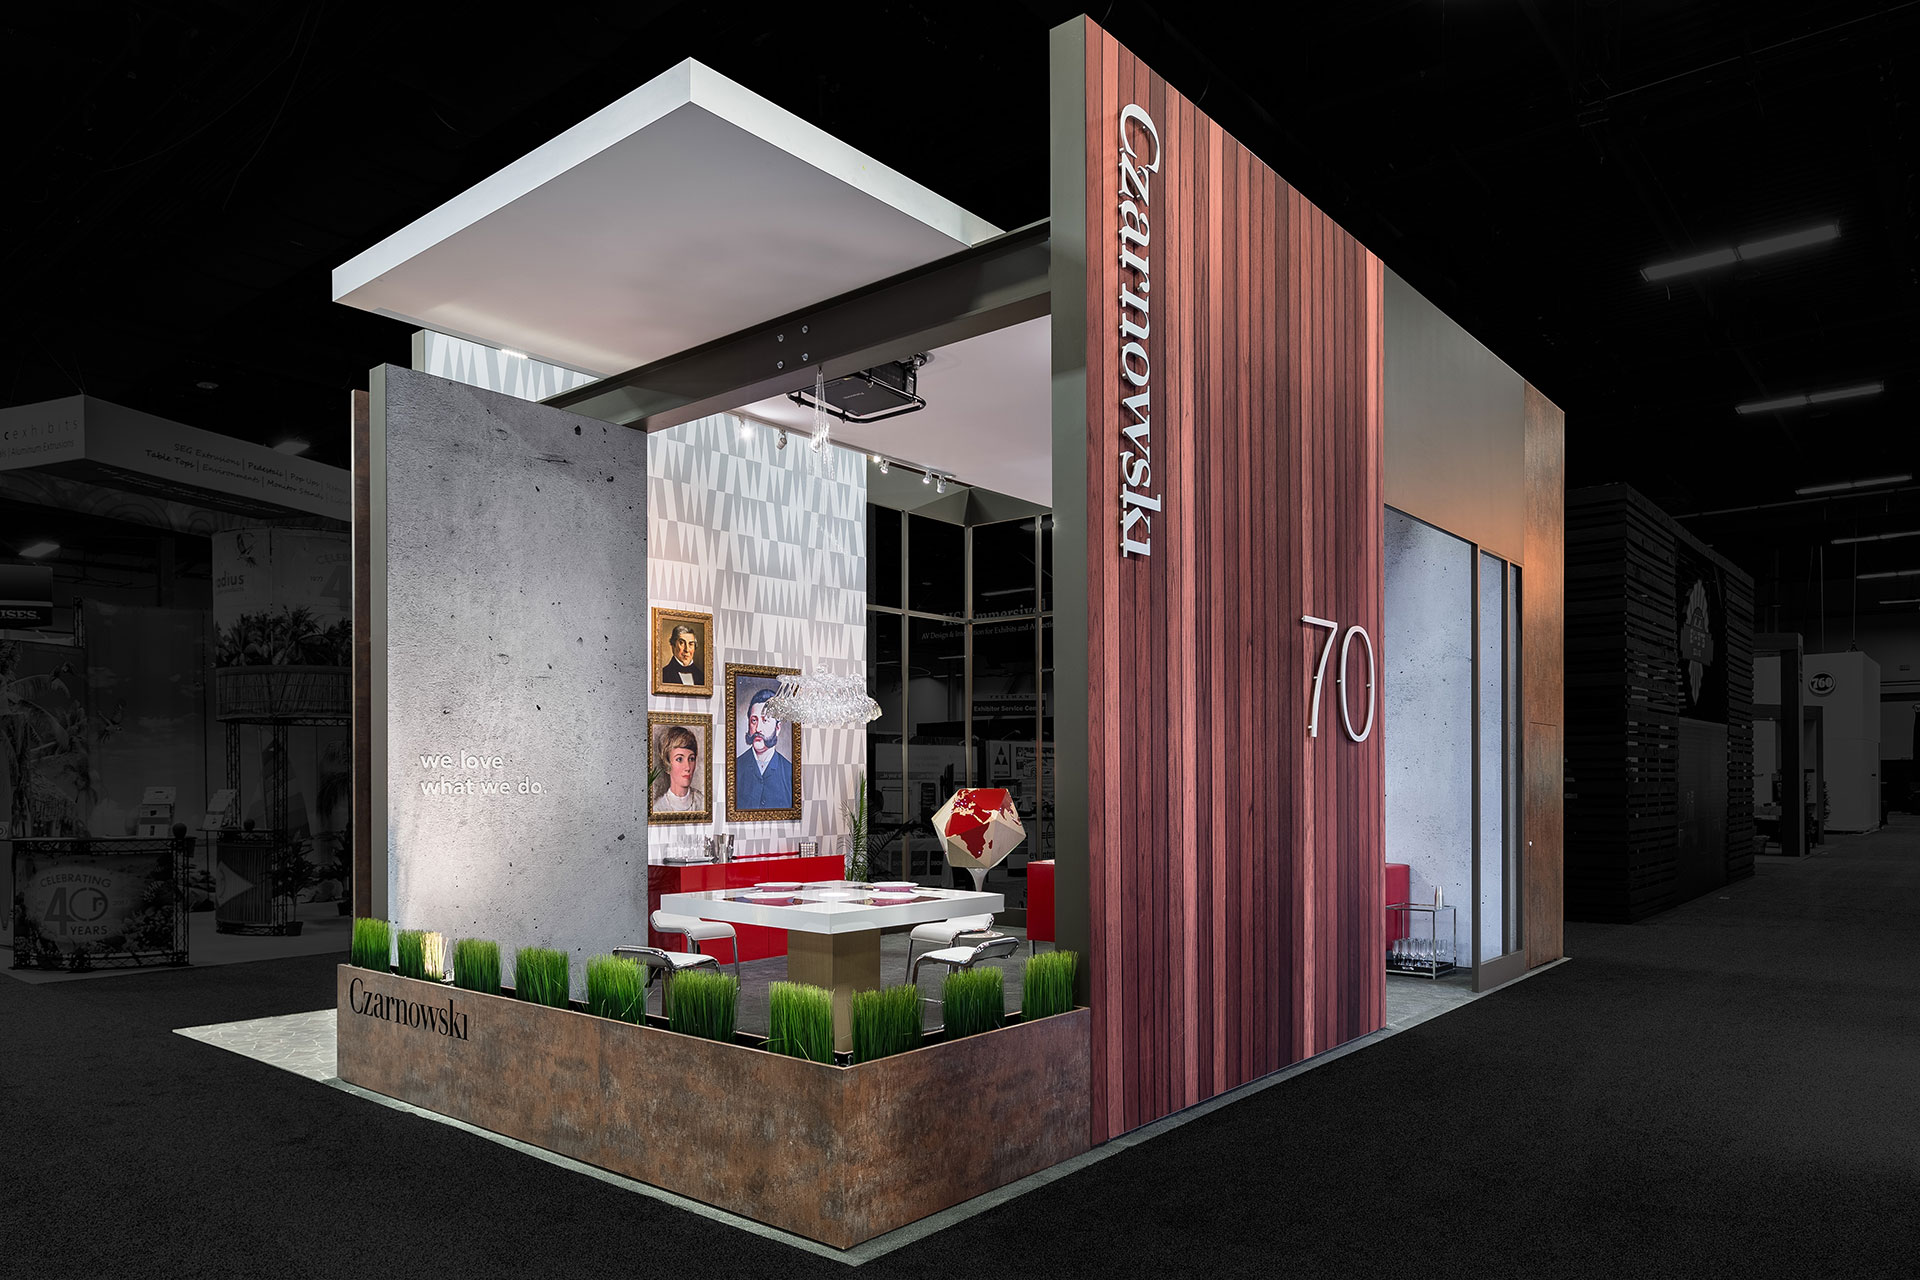 Czarnowski trade show exhibit with a wood-paneled exterior and low decorative planter as an exterior border with classical art on a wall in the background and edited so that the outside area is darkened and colorless.